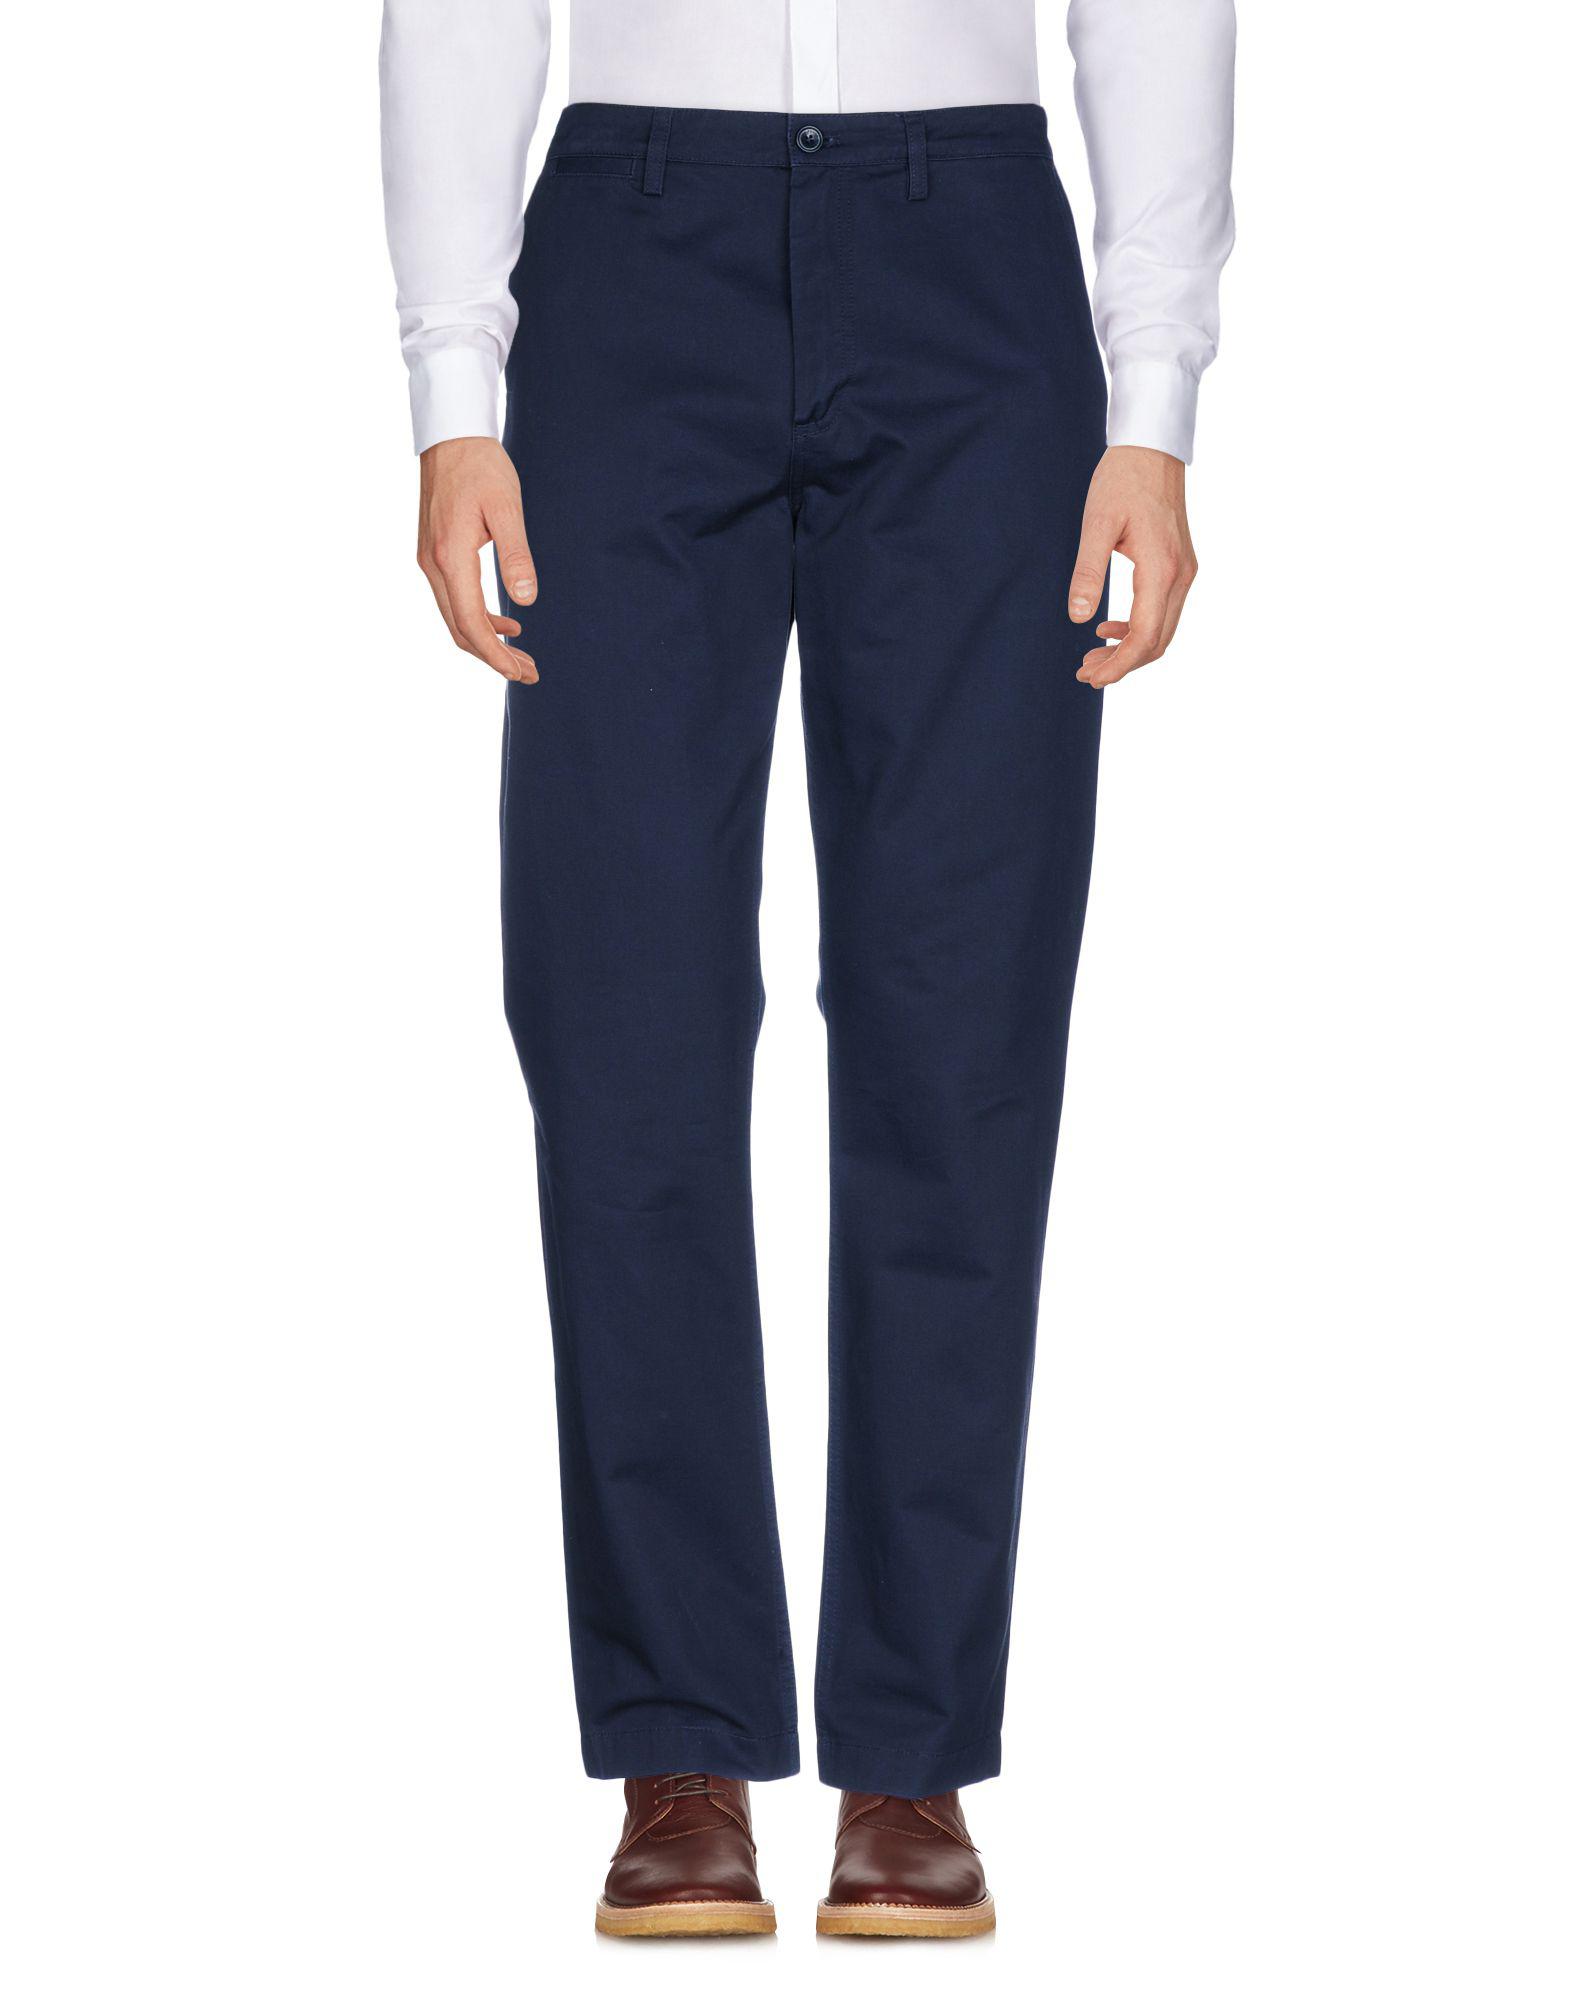 Fred Perry Cotton Casual Trouser in Dark Blue (Blue) for Men - Lyst